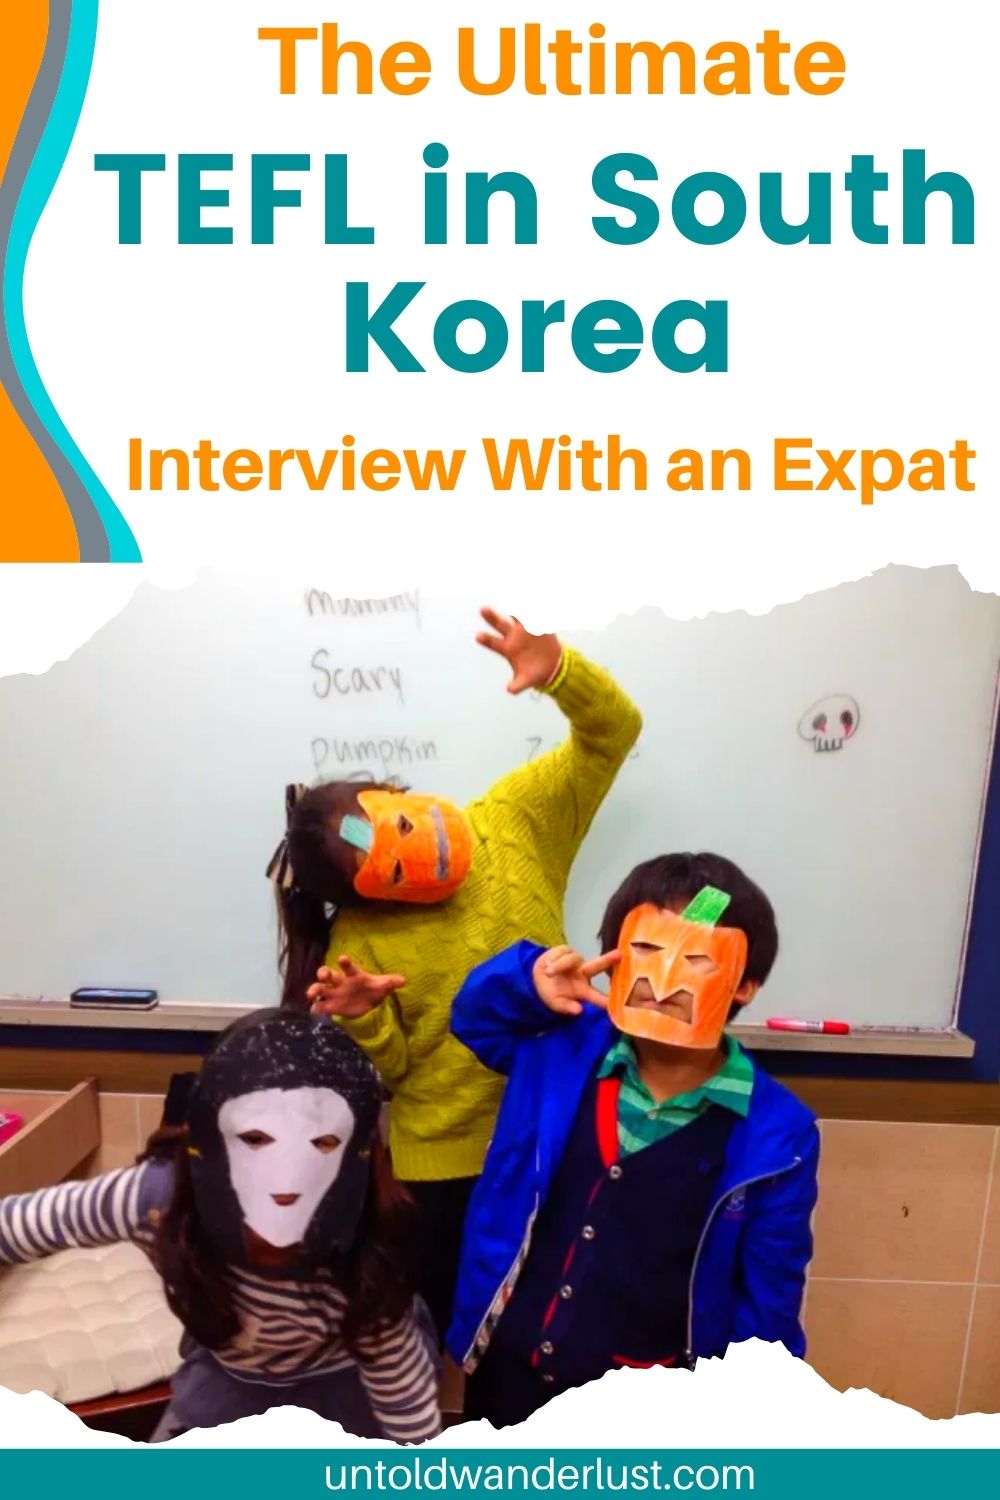 TEFL in South Korea | The Ultimate Interview